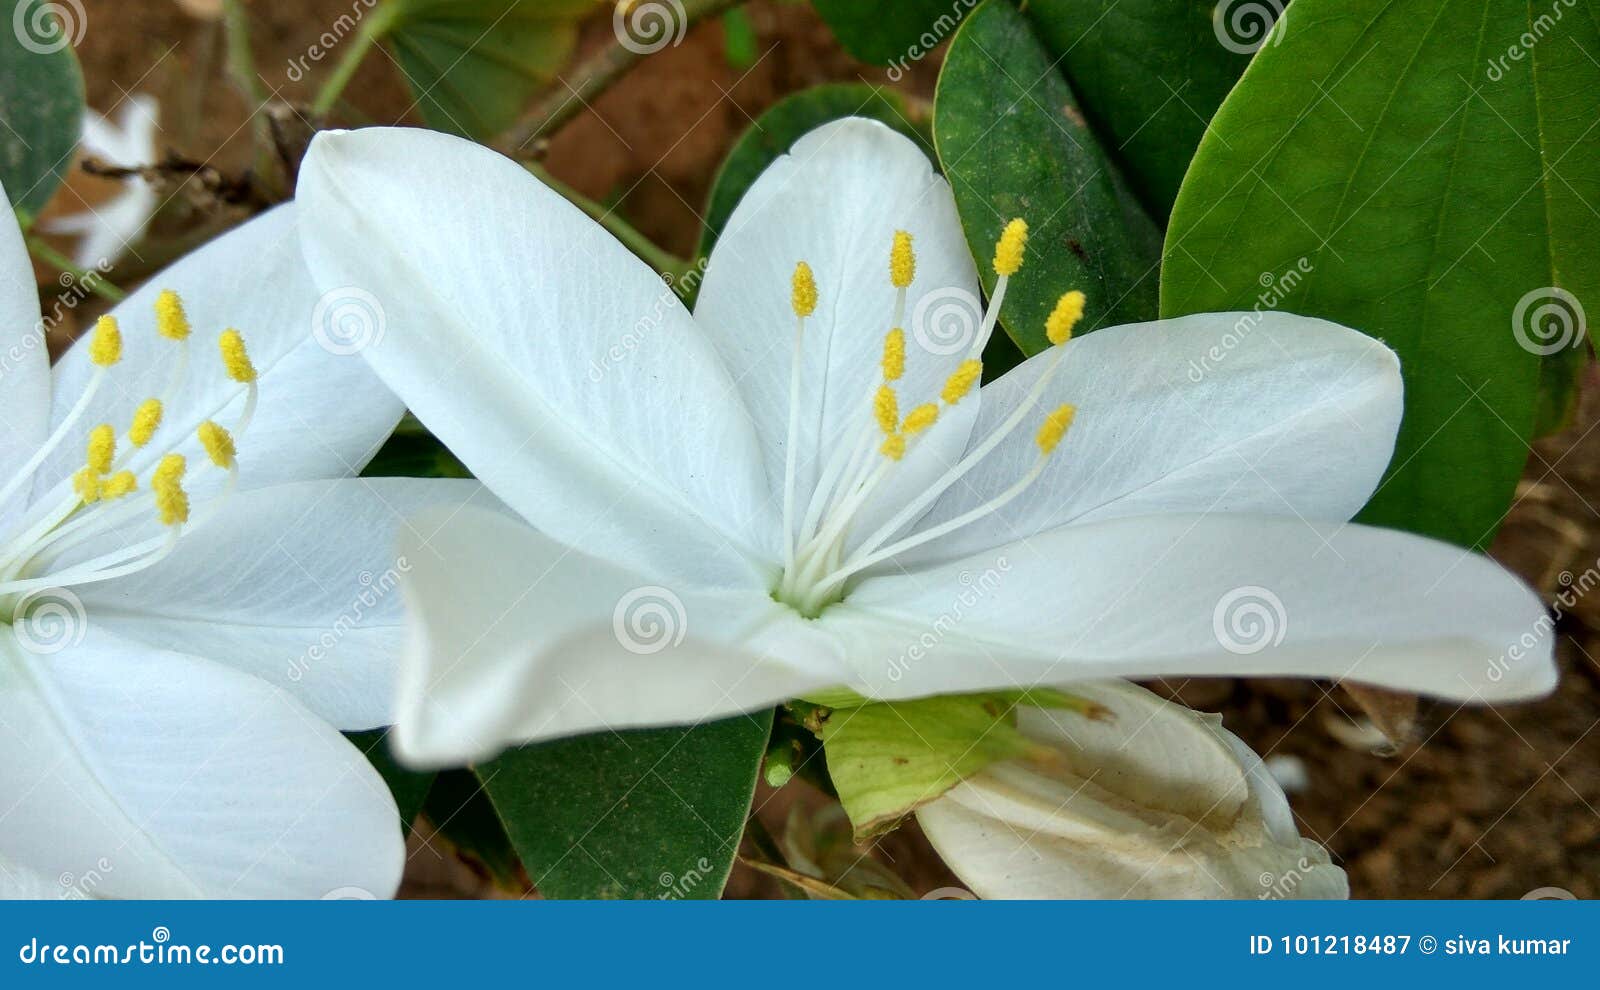 White flowers stock image. Image of flowers, white, leafs - 101218487